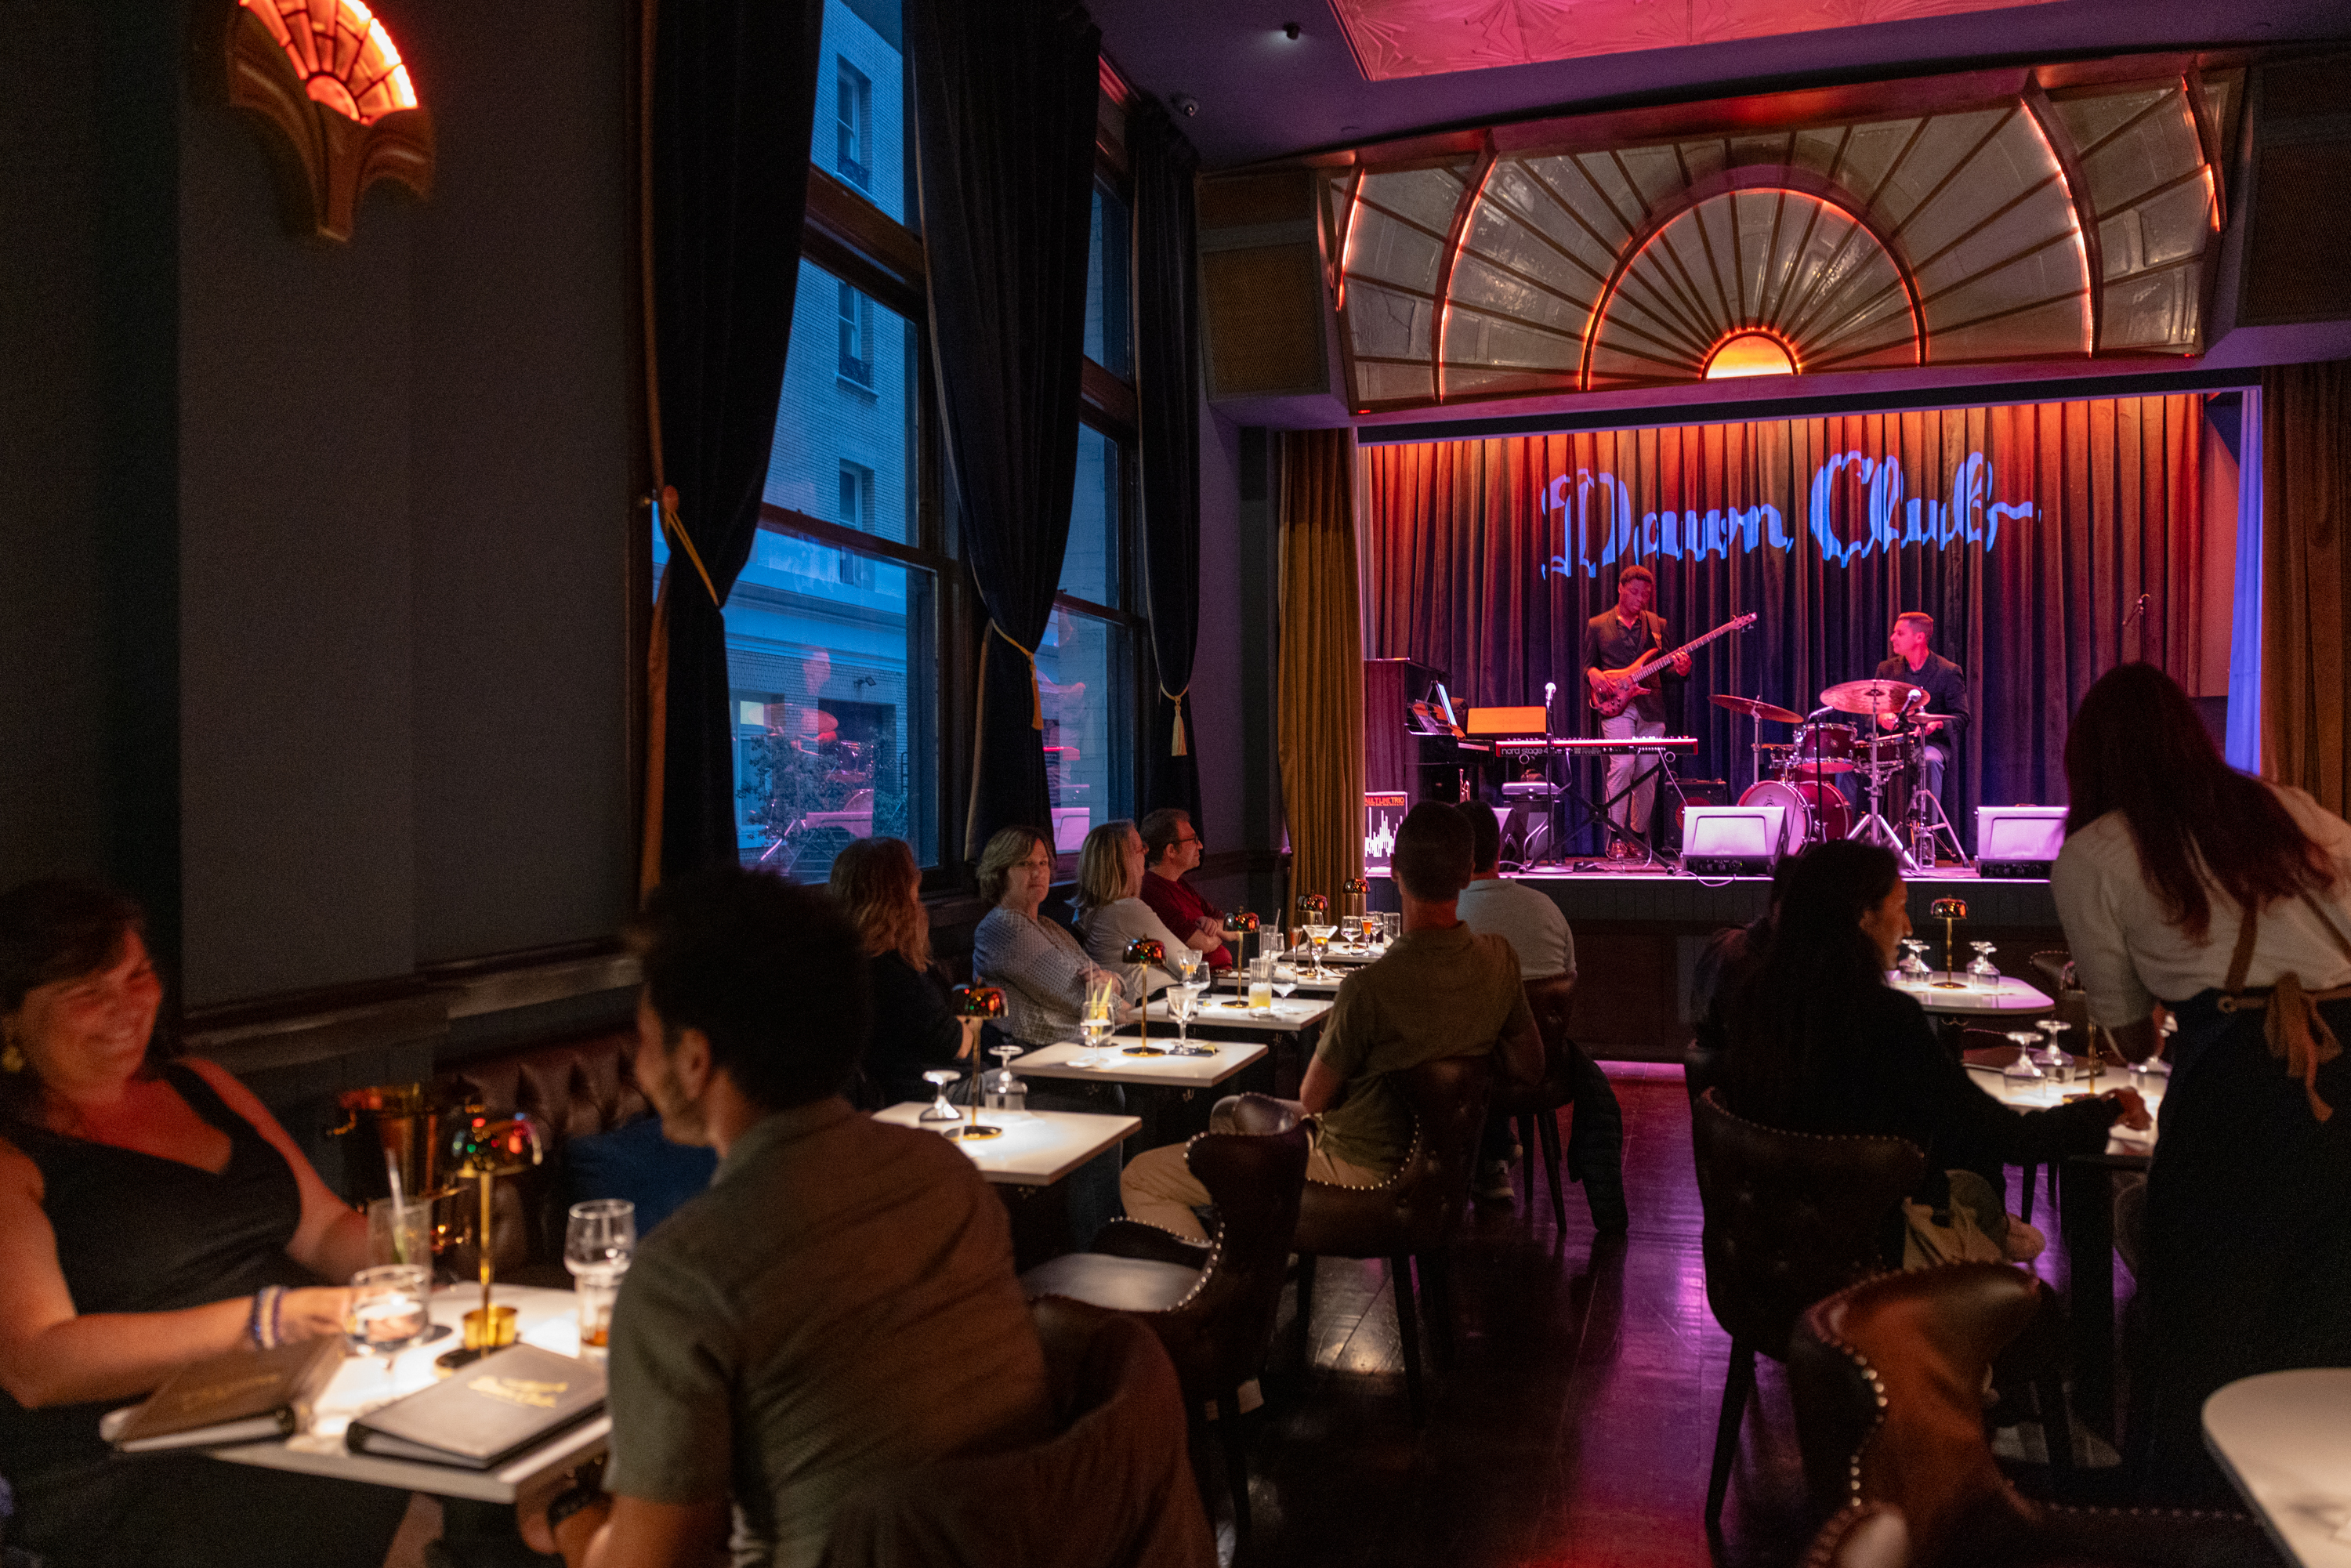 Guests enjoy drinks and live music from the jazz band at the Dawn Club in San Francisco.